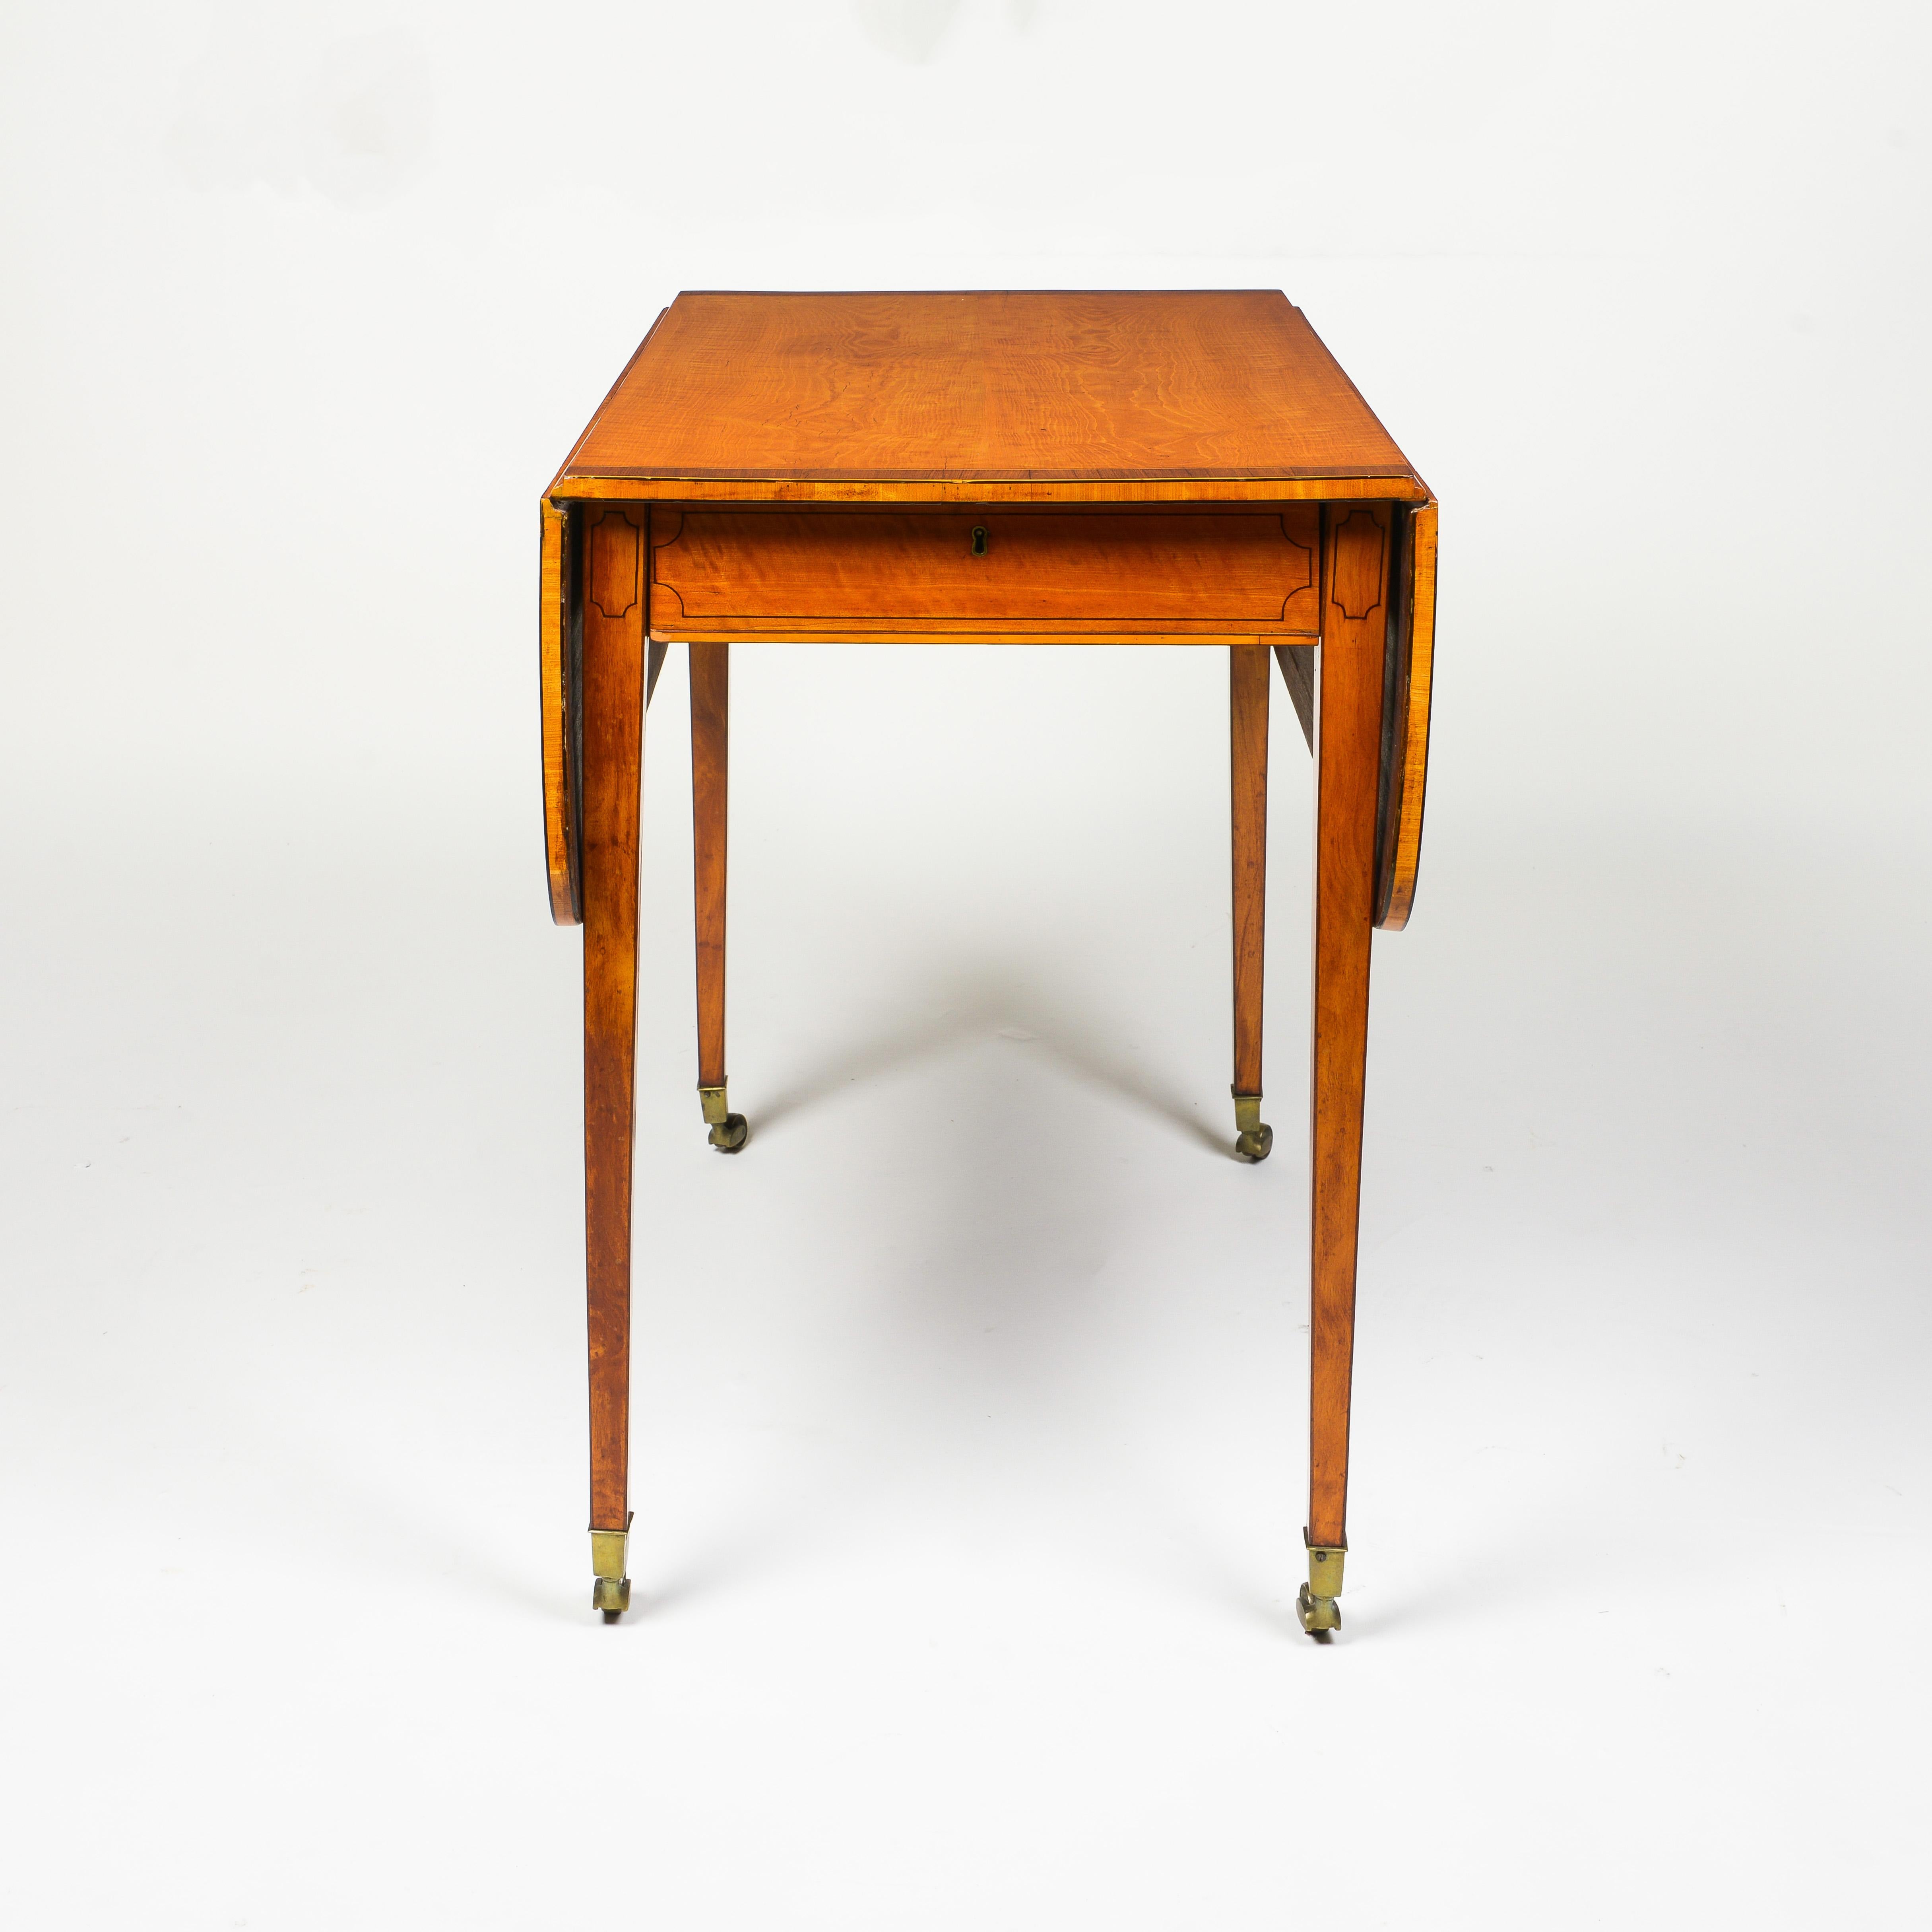 With ebonized stringing throughout; the rectangular mahogany banded top with drop leaves over a frieze drawer, raised on square tapering legs ending in brass caps and casters.